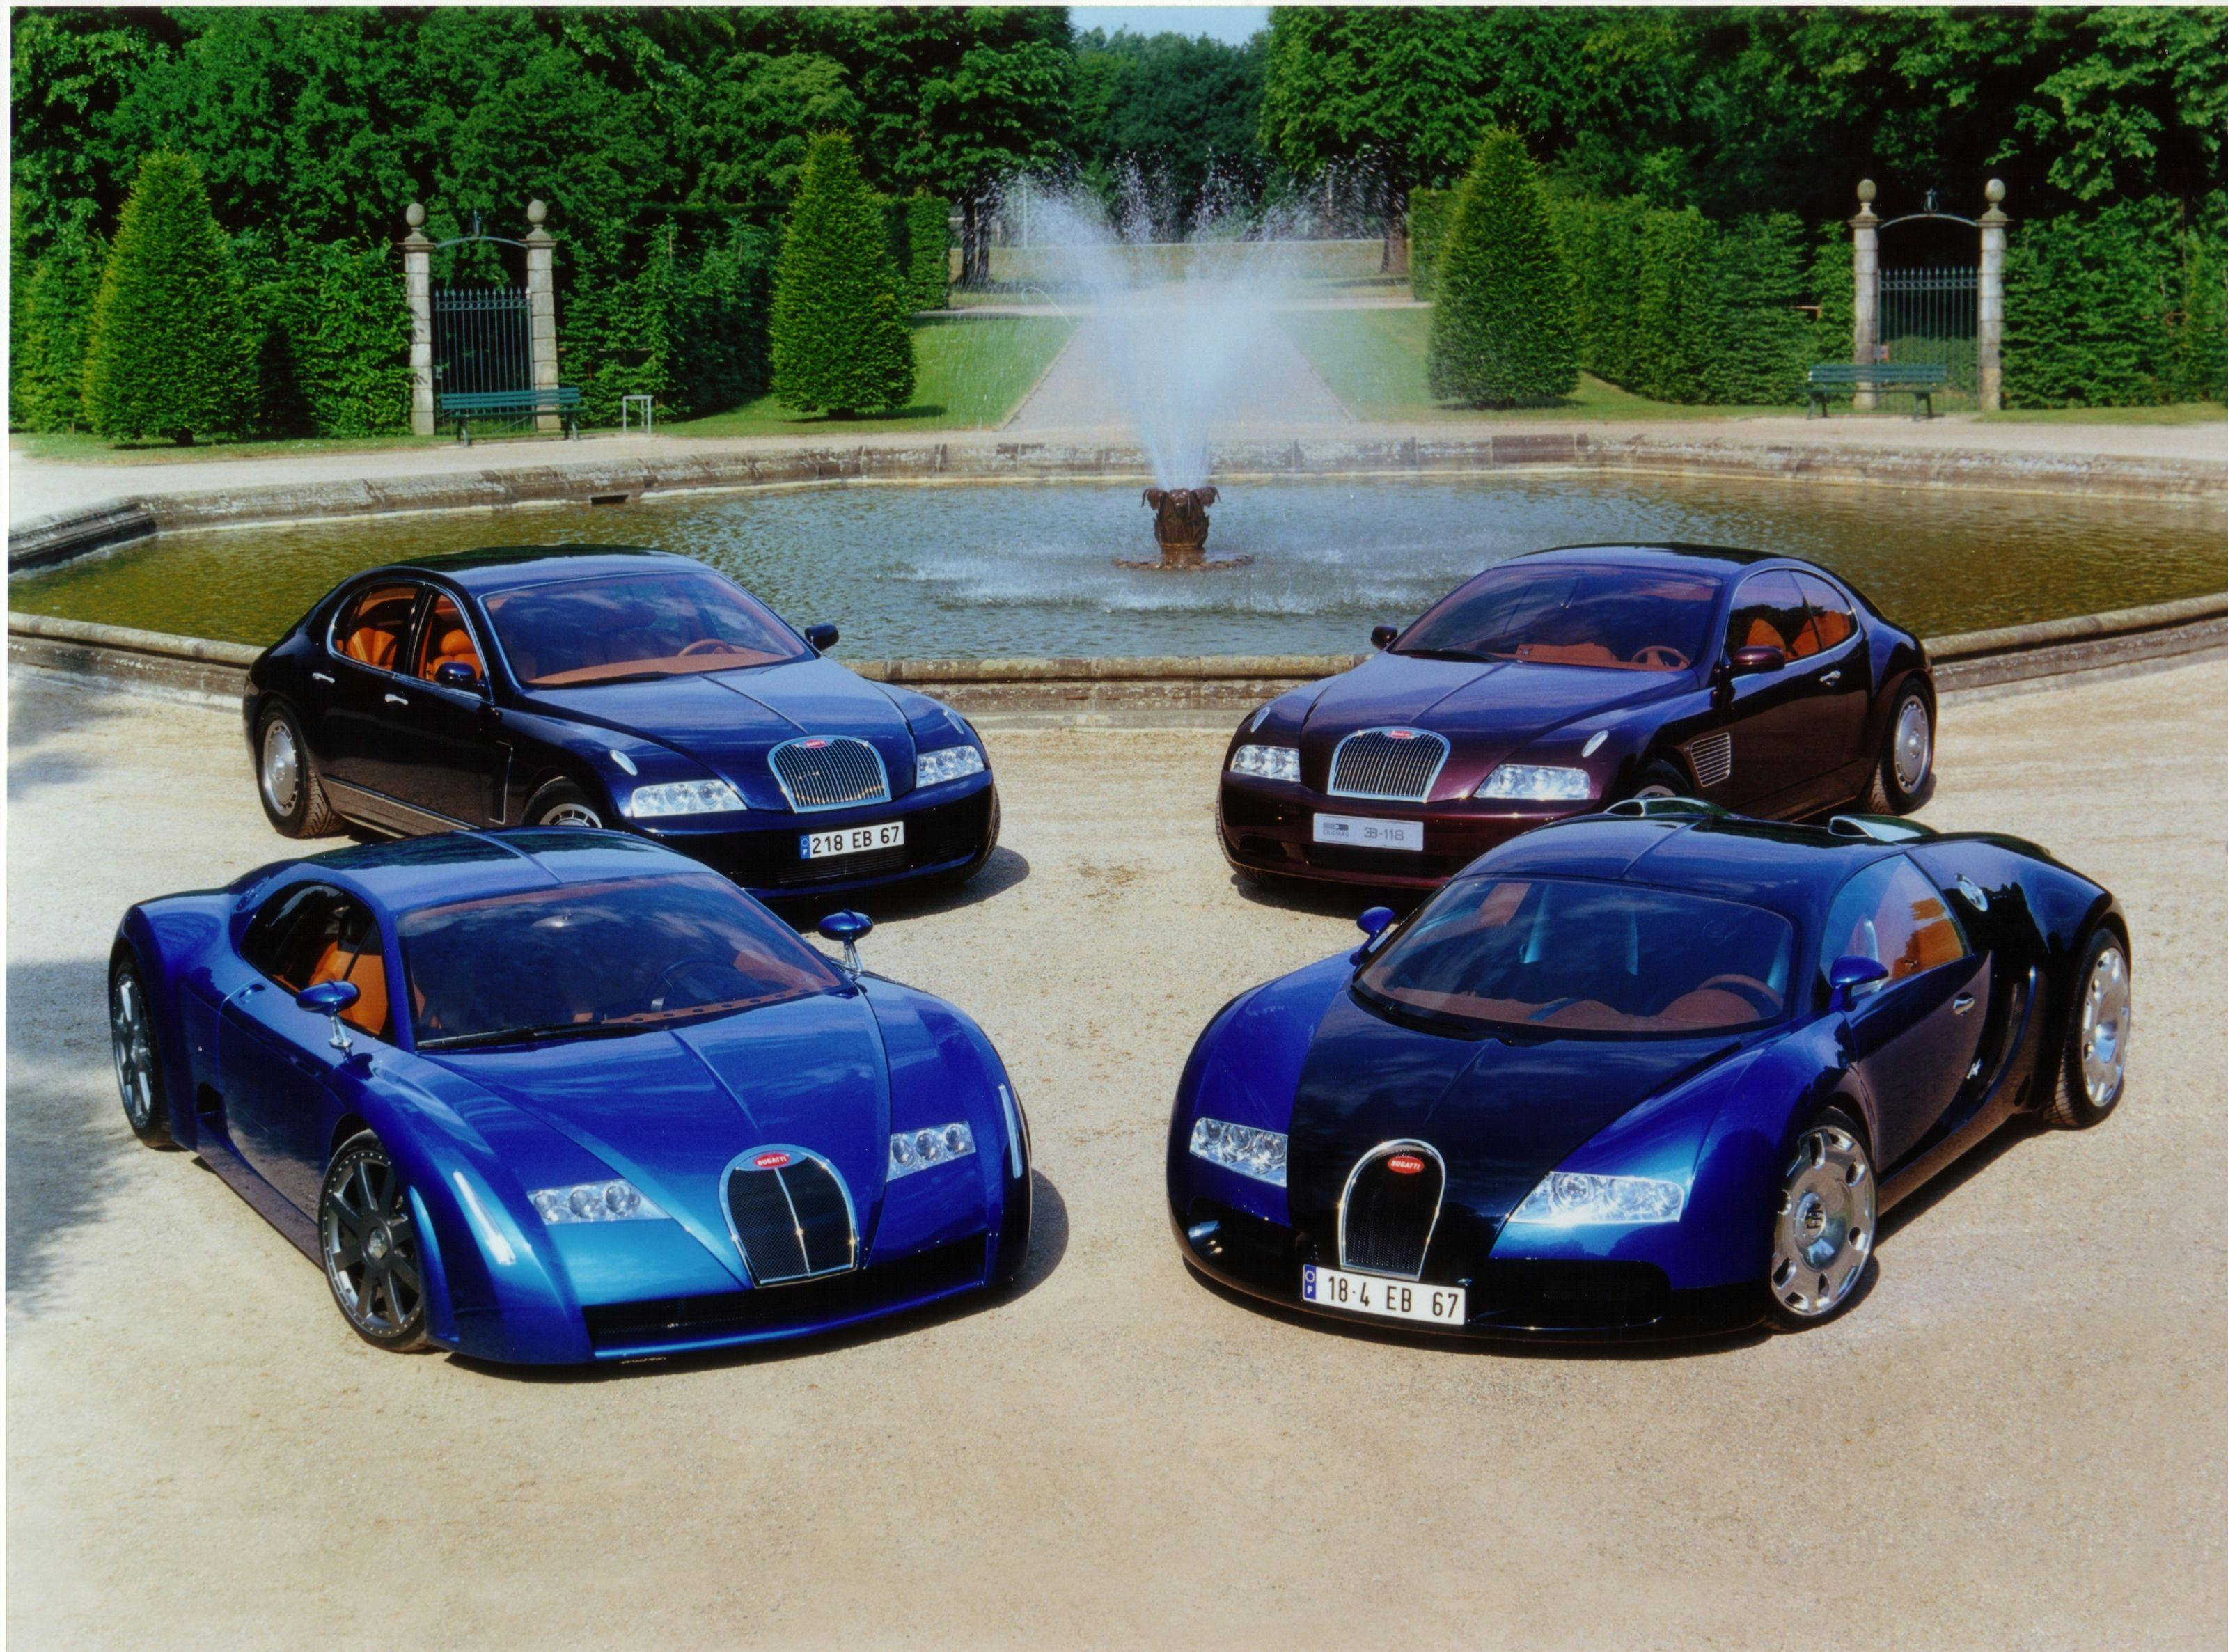 15 years of Bugatti Veyron – how it all began